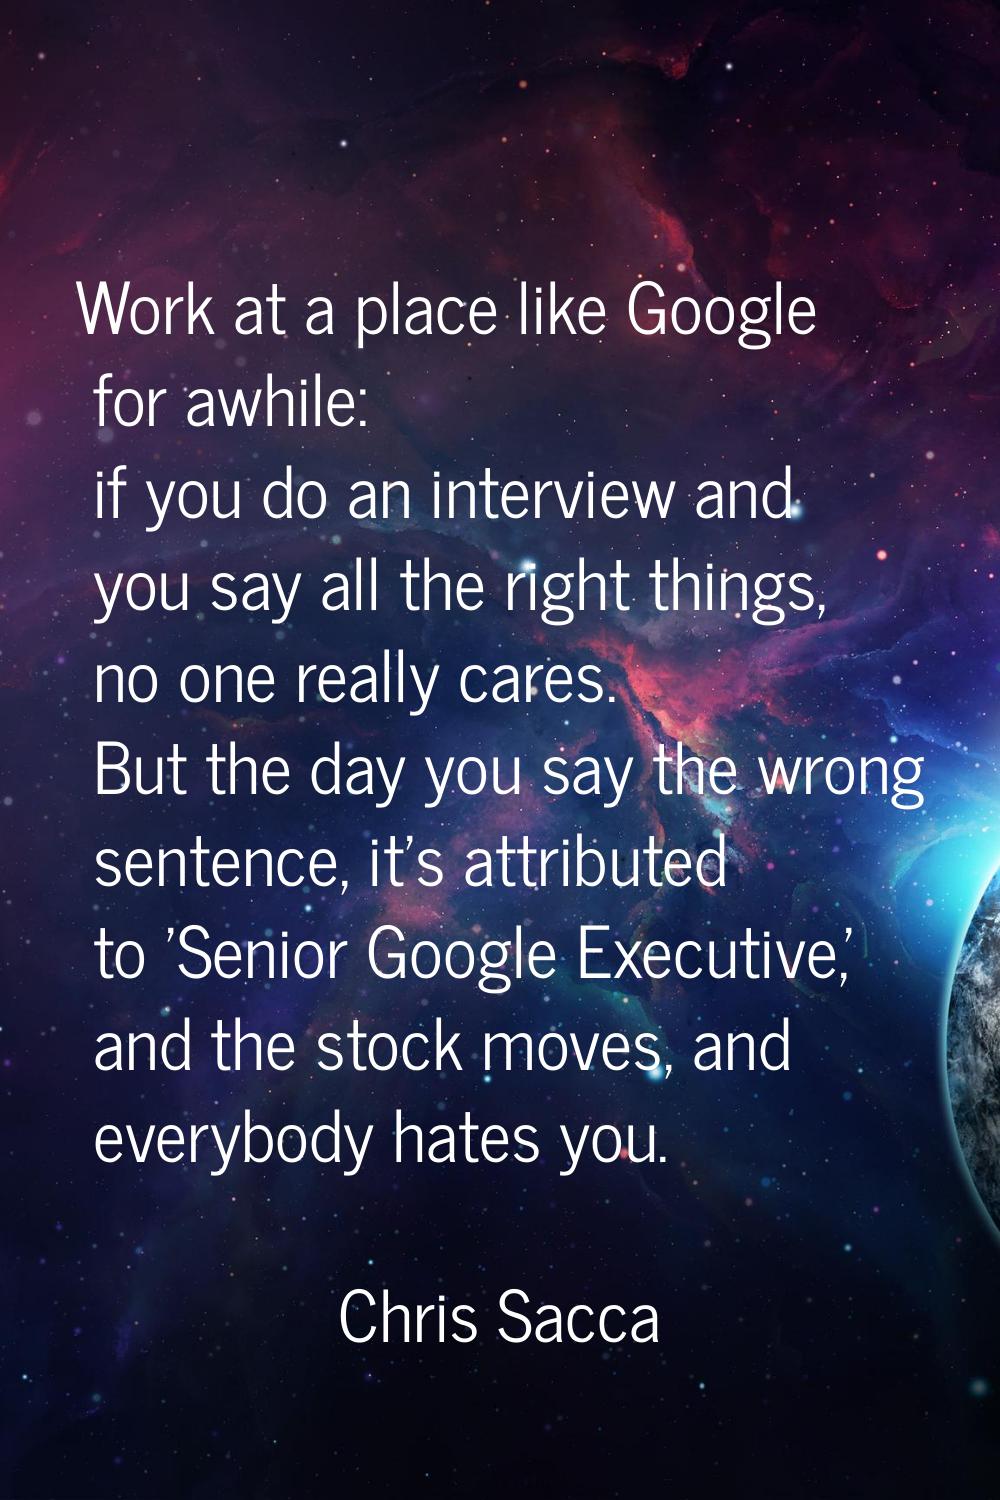 Work at a place like Google for awhile: if you do an interview and you say all the right things, no